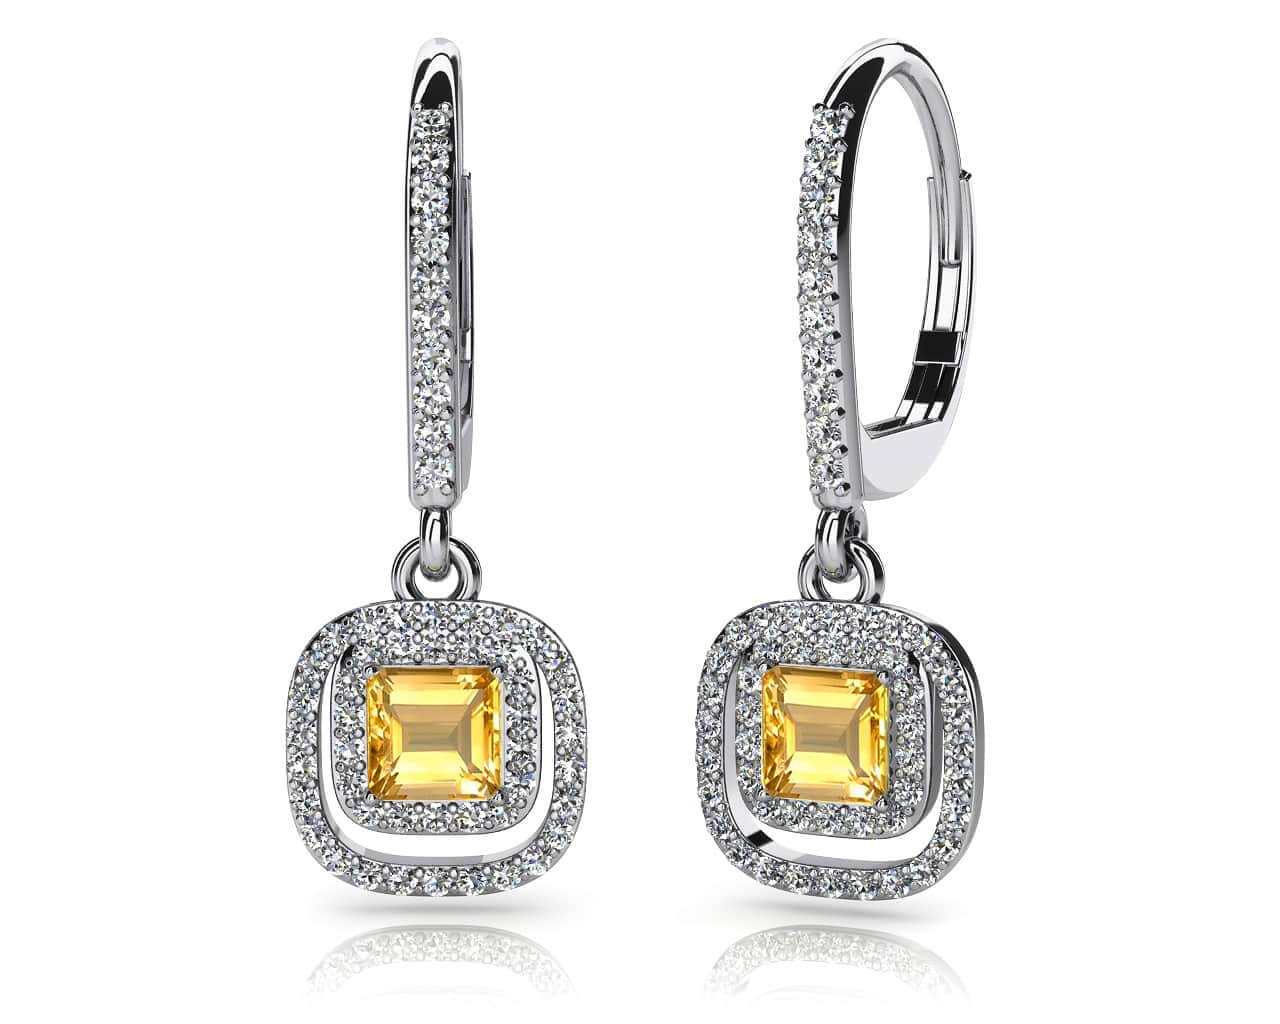 Day To Night Gemstone And Diamond Earrings In 14K 18K Or Platinum